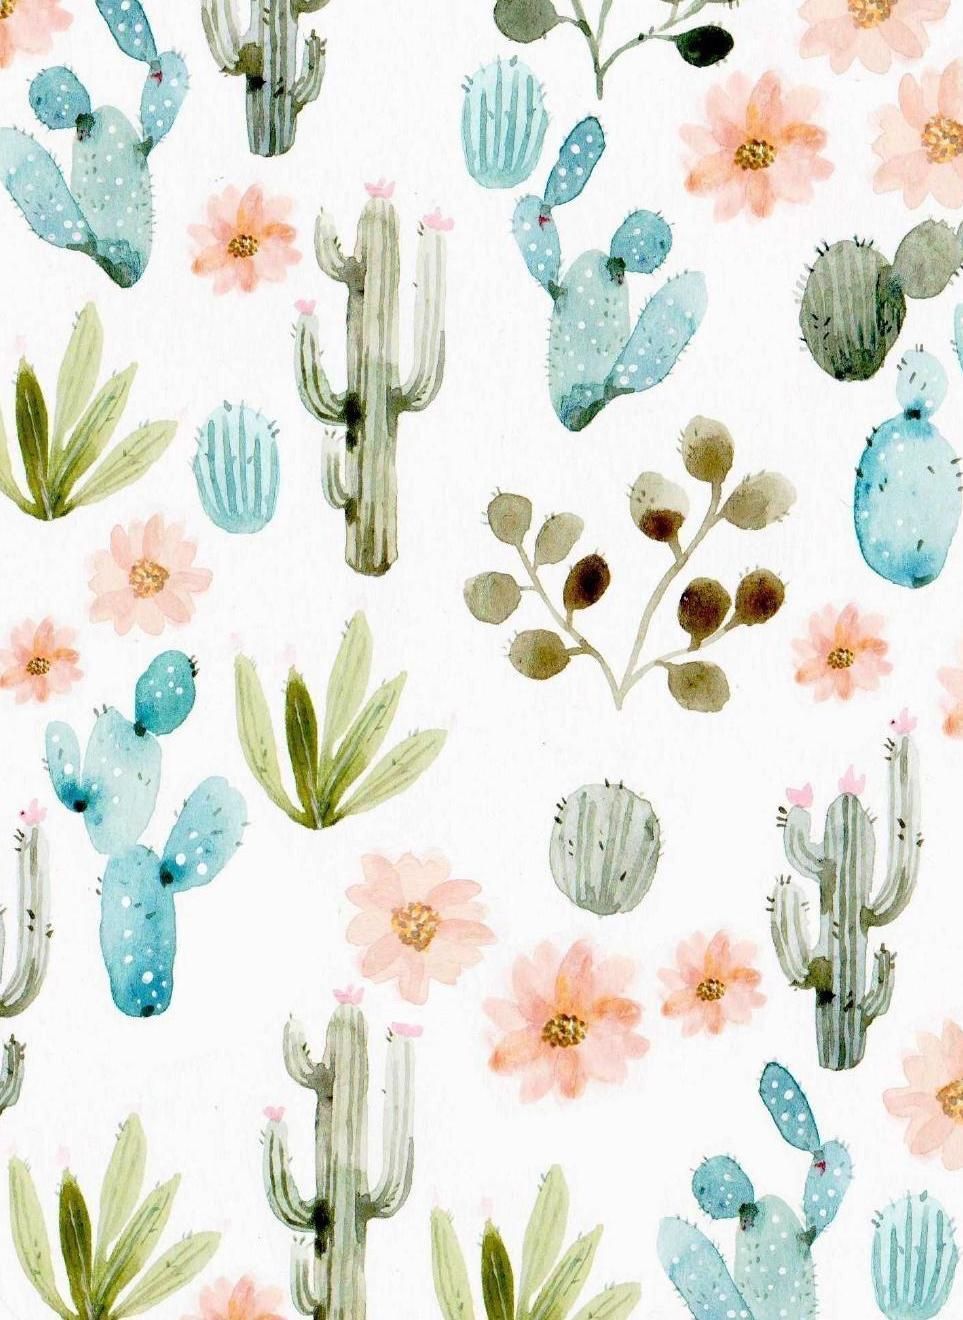 Hipster Watercolor Cactus Wallpaper Cactus Background